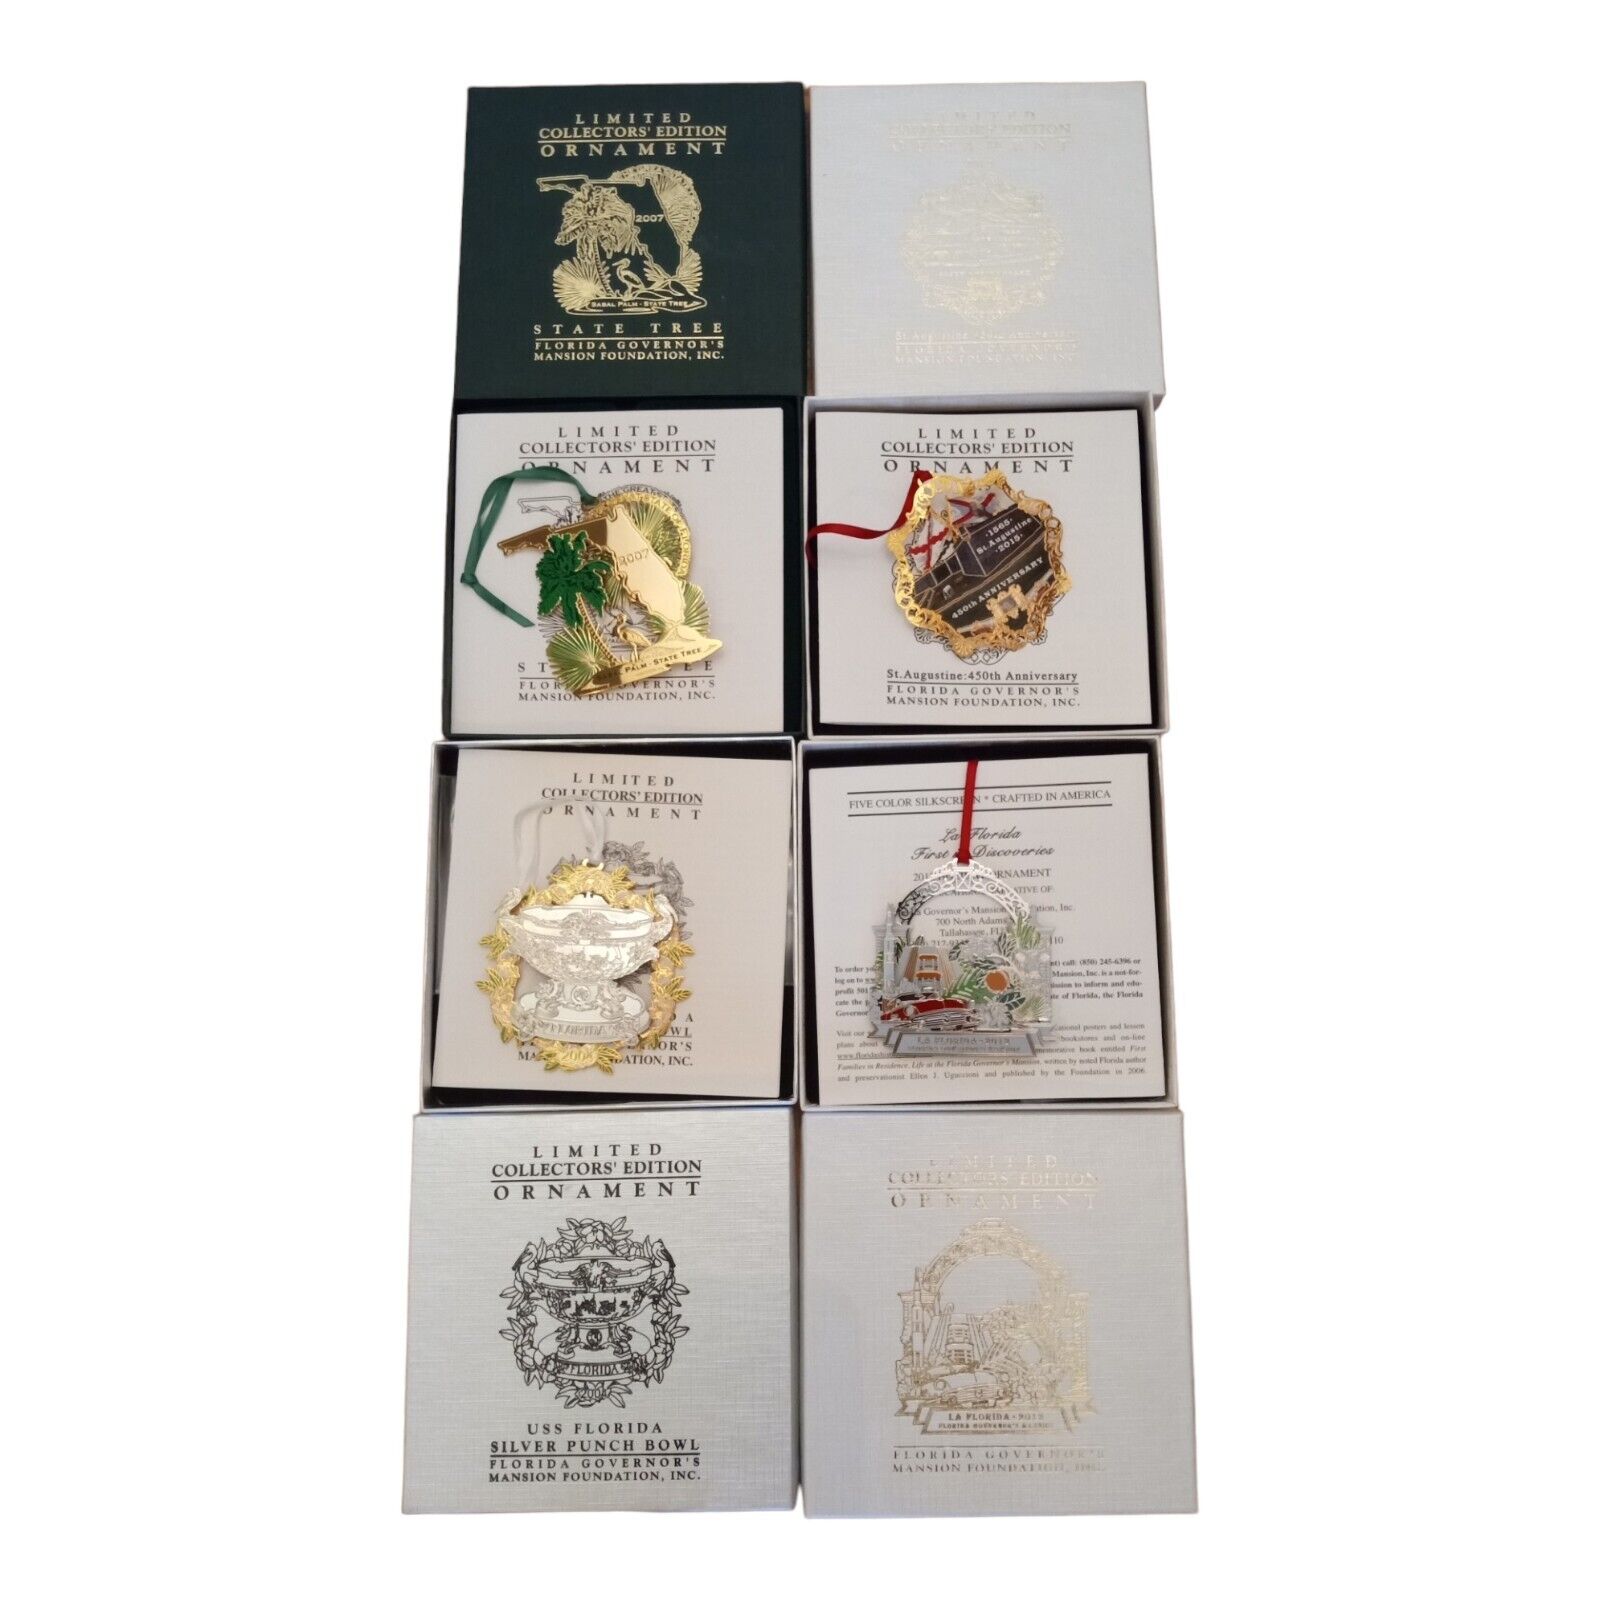 Limited Collector's Edition Ornaments; Florida Governor's Mansion Foundation,...